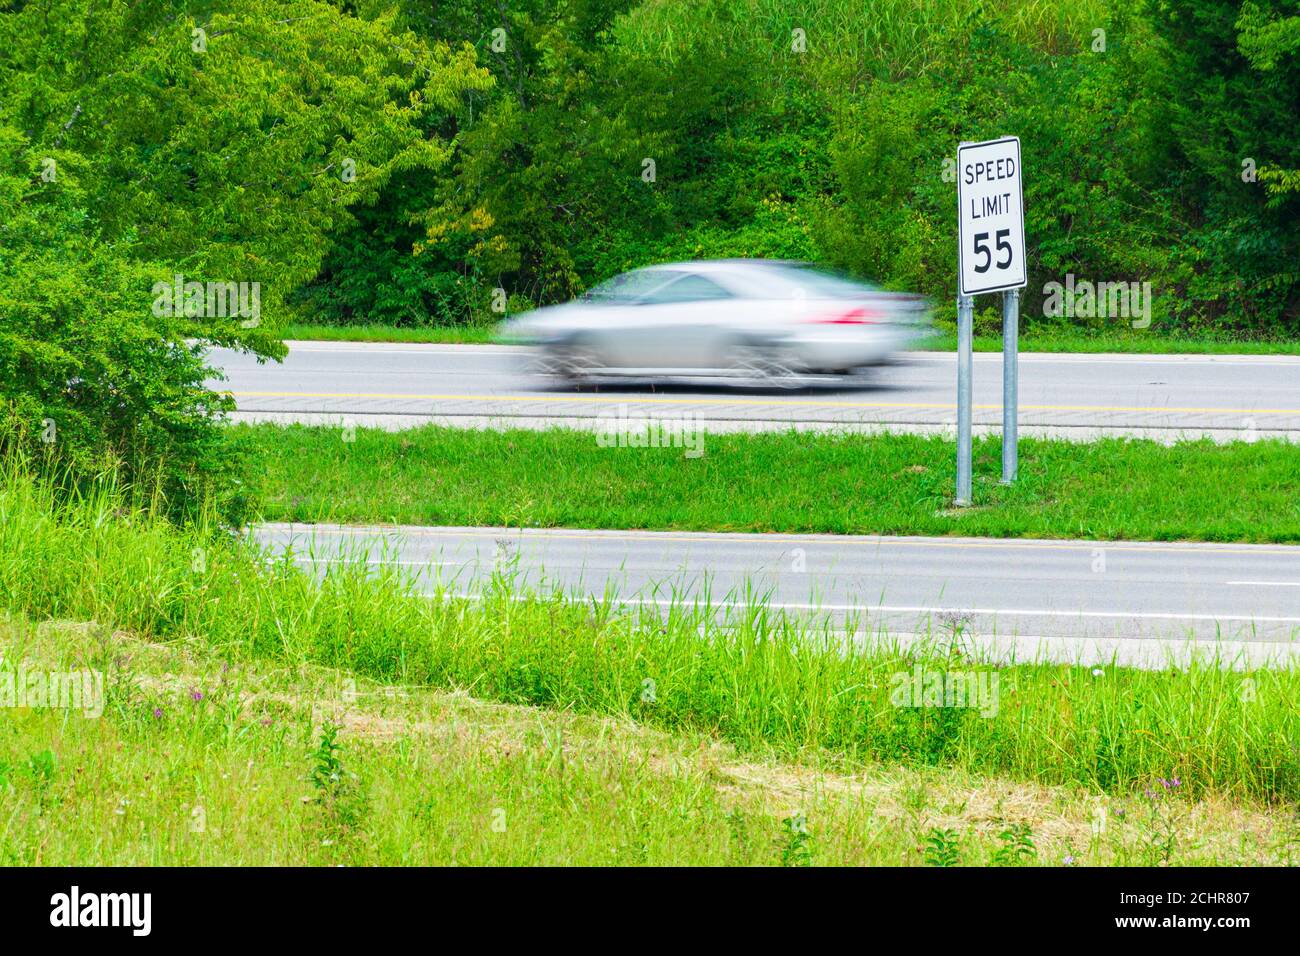 Horizontal shot of a speeding car streaking by a speed limit sign.  Blurring shows motion. Stock Photo